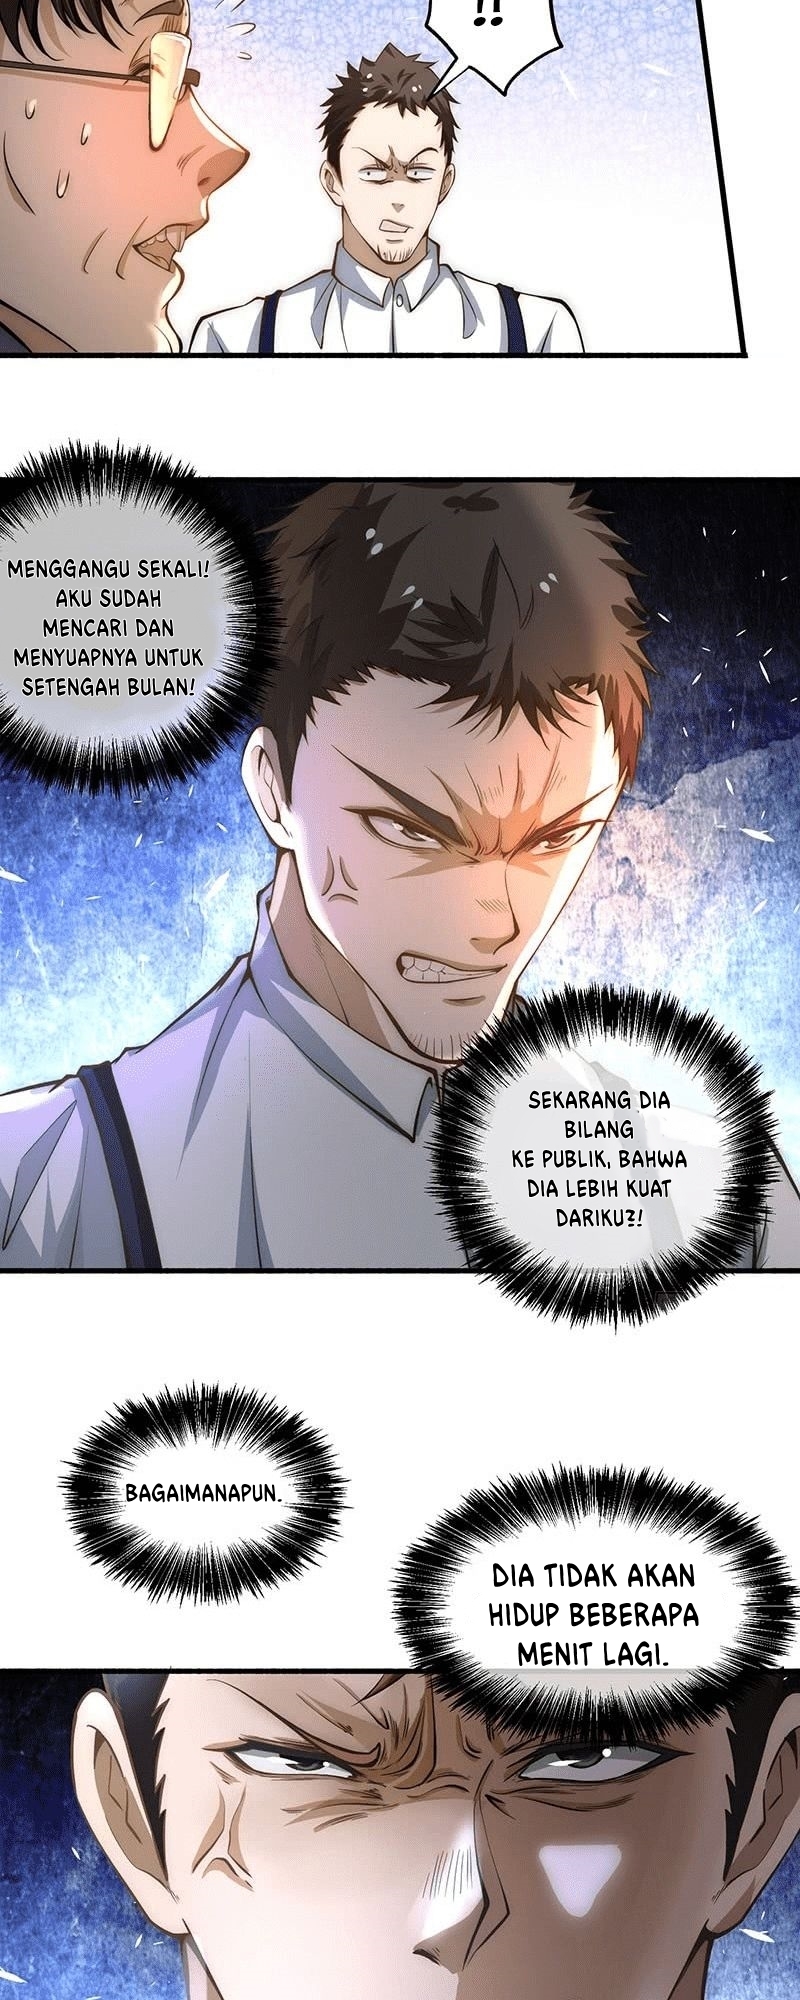 Almighty Master Chapter 15